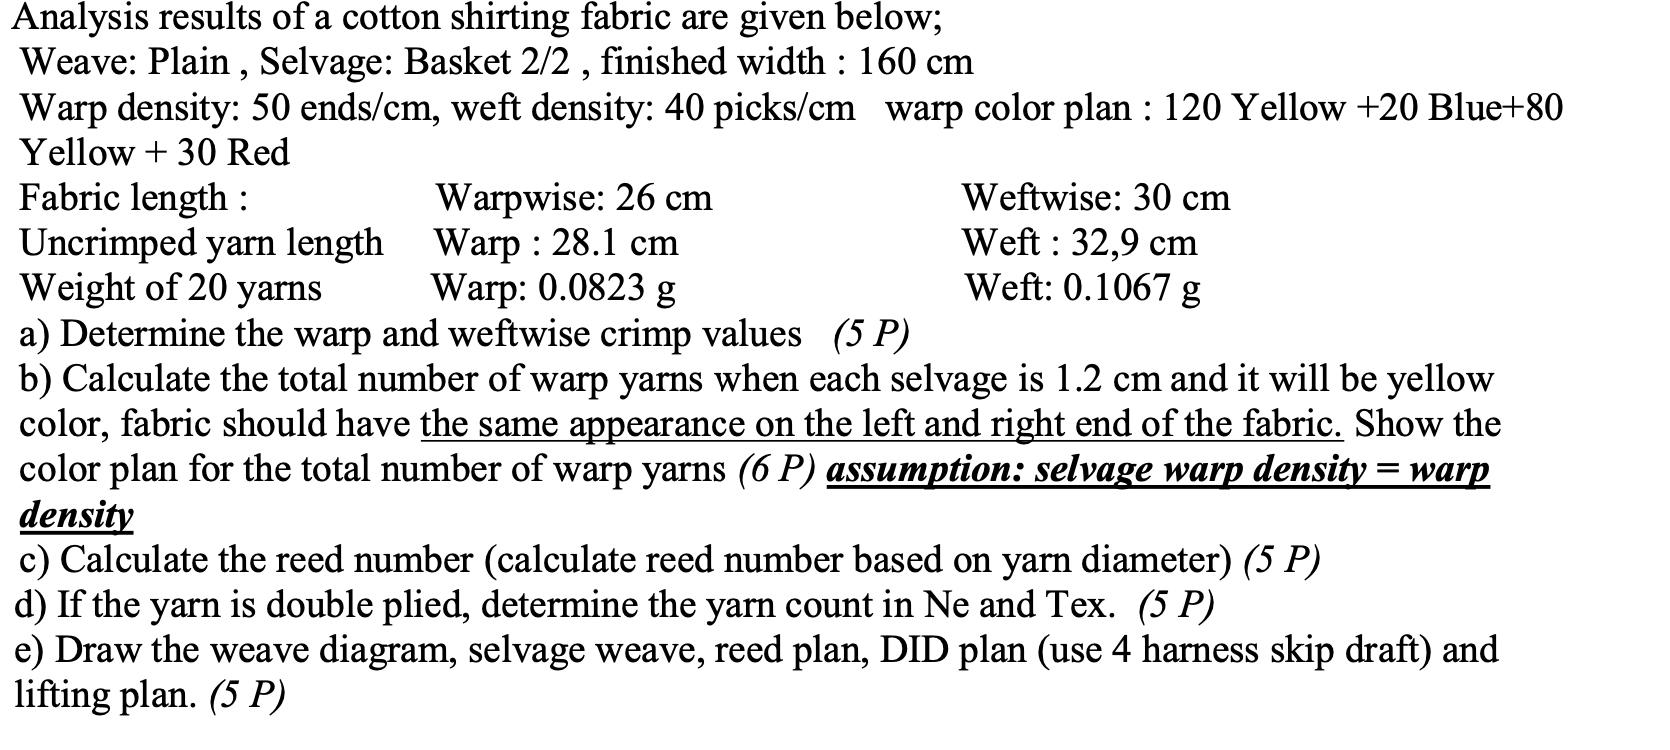 Analysis results of a cotton shirting fabric are given below; Weave: Plain, Selvage: Basket 2/2, finished